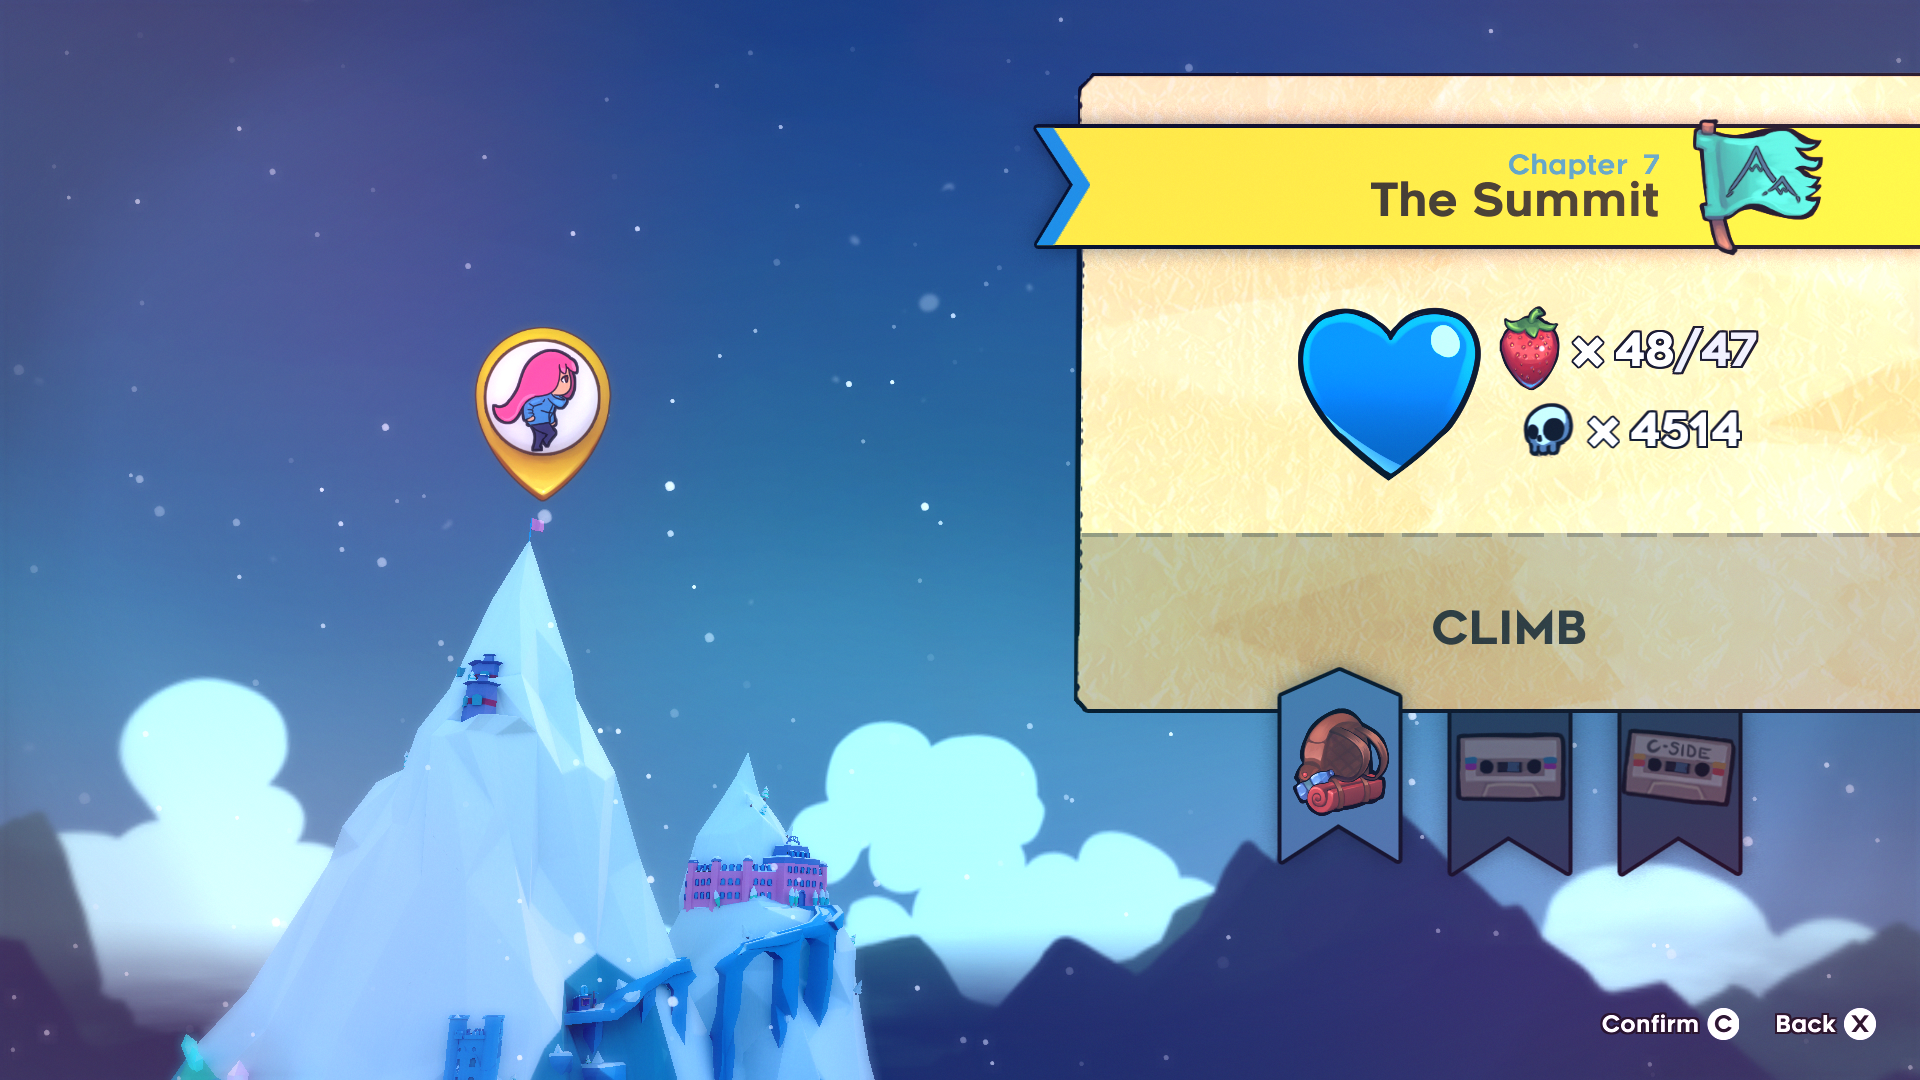 Level select for Chapter 7: The Summit, showing a clear view of the summit.  48/47 strawberries collected, 4514 deaths.